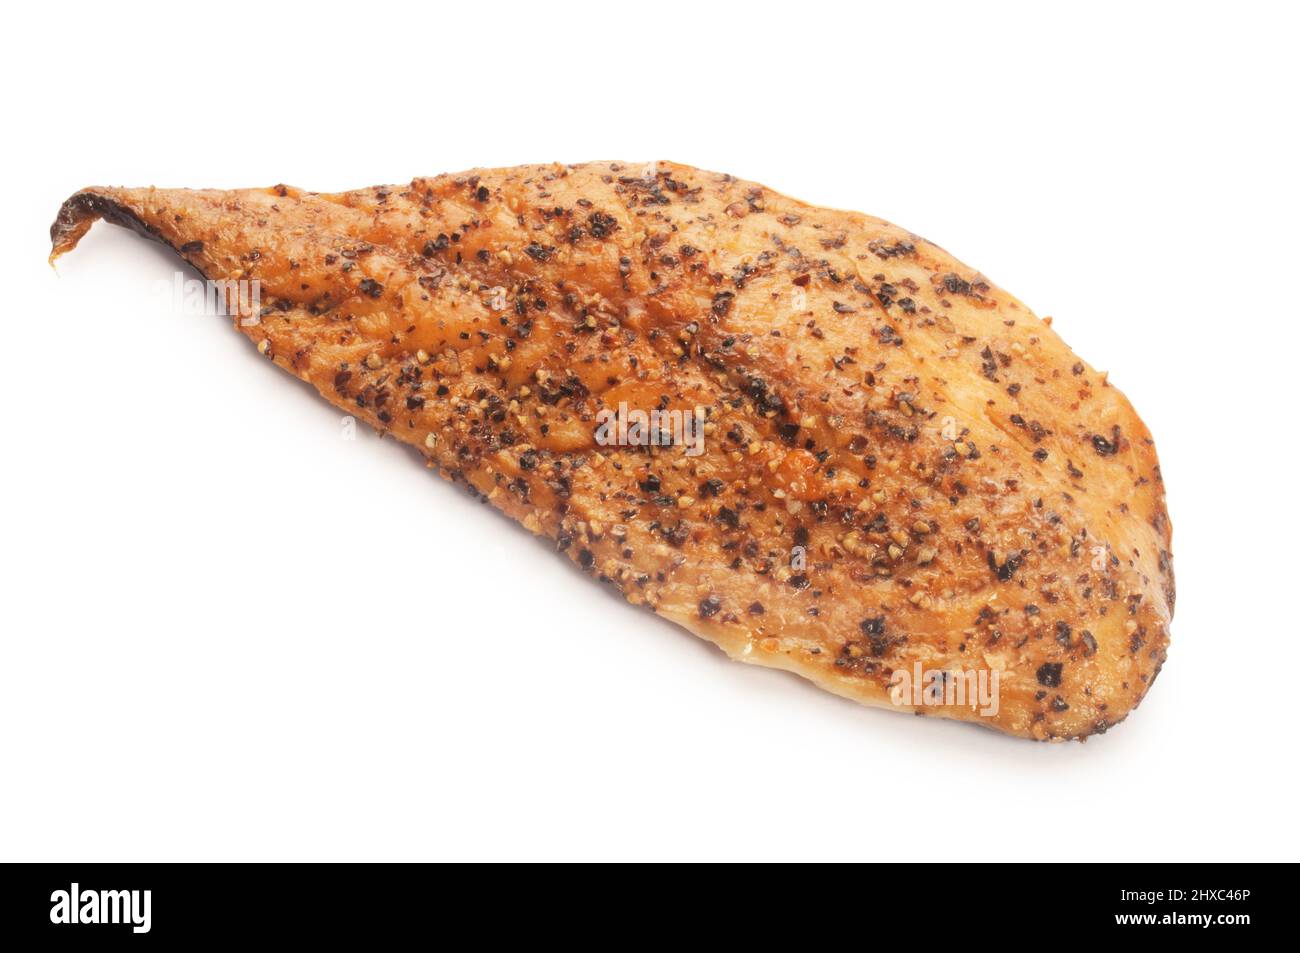 Studio shot of hot smoked, peppered mackerel fillets cut out against a white background - John Gollop Stock Photo